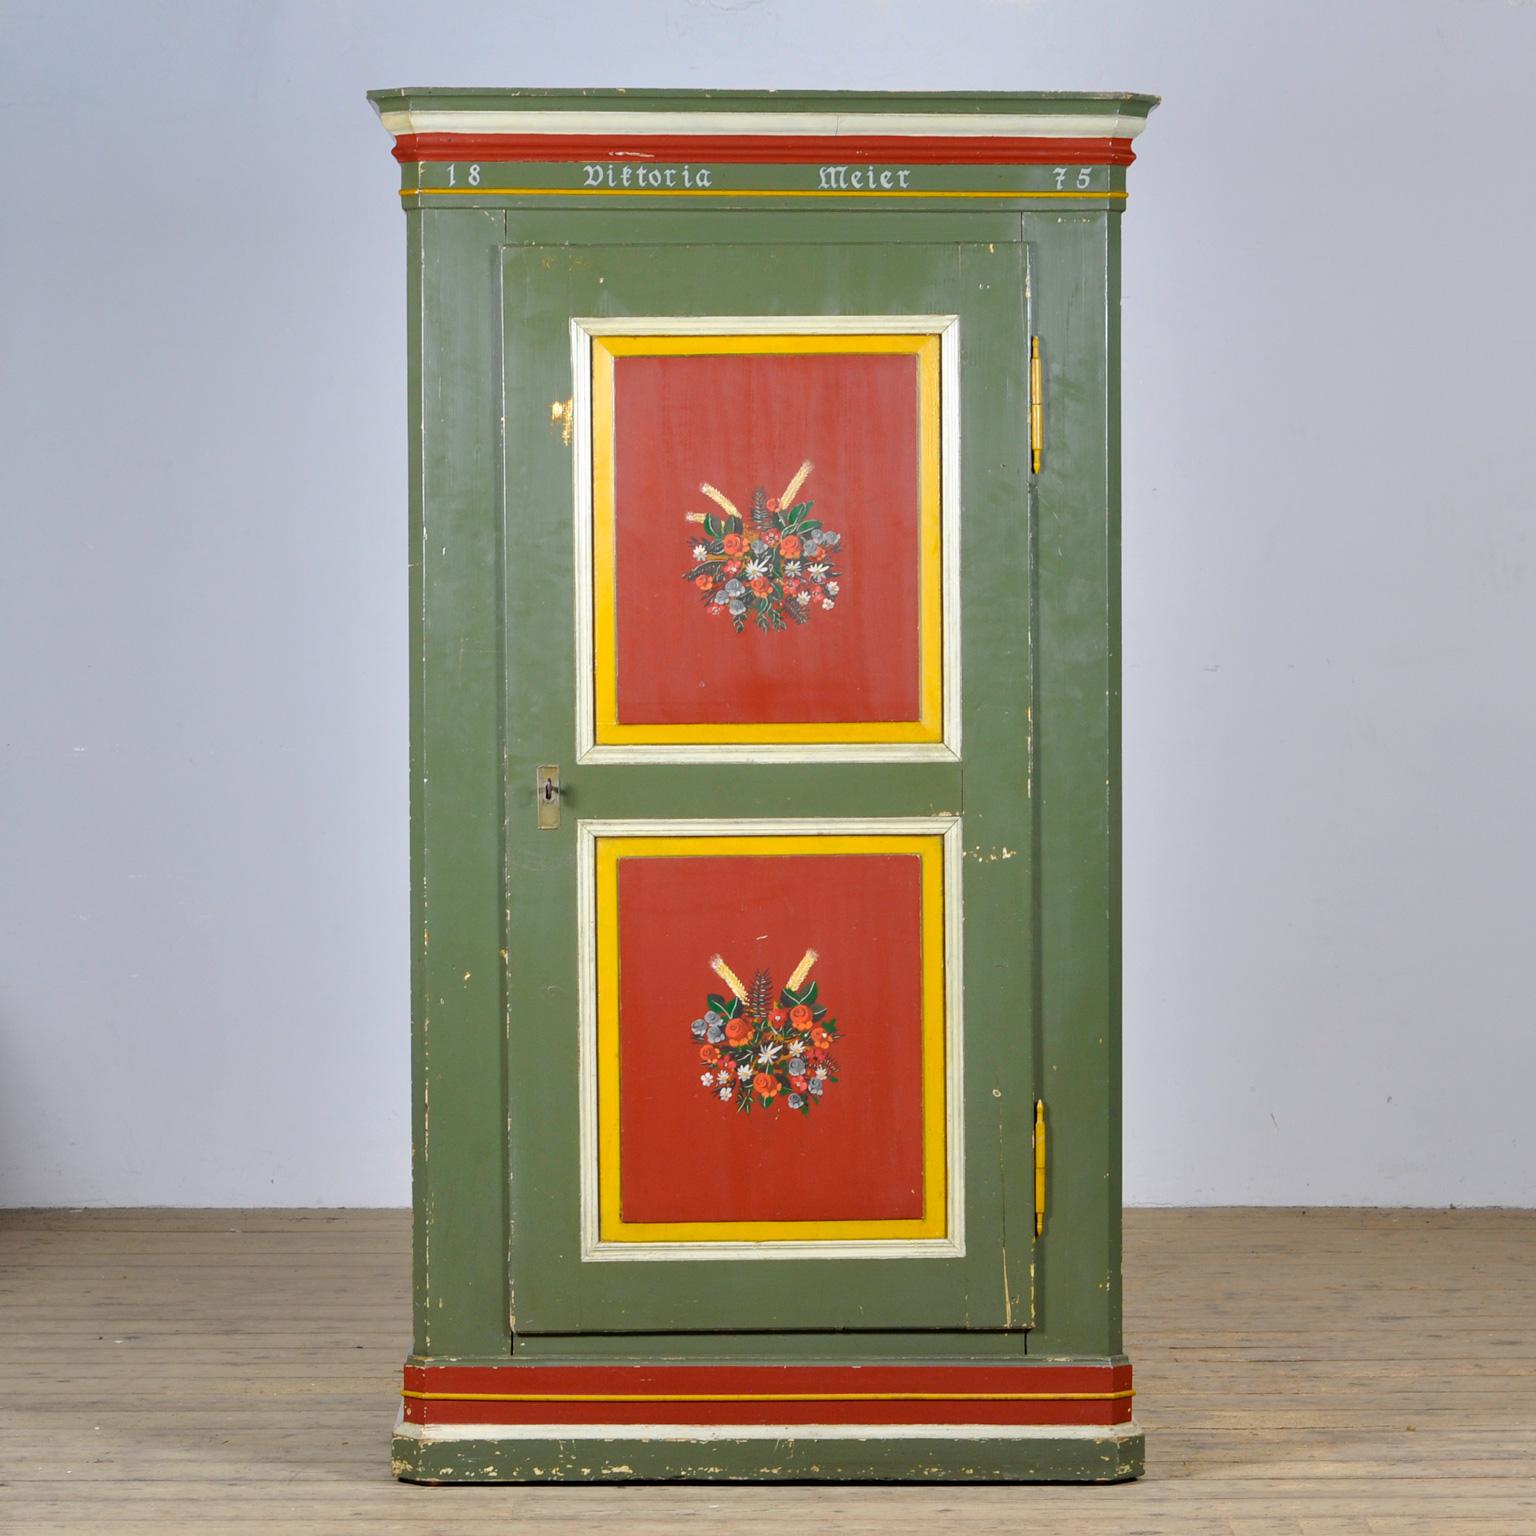 A beautiful single door cabinet from the rural south of Germany. The cabinet was once made for one Victoria Meier in 1875. The cabinet was probably given as a wedding present. This cabinet is made of solid pine and is hand painted in vibrant colors.